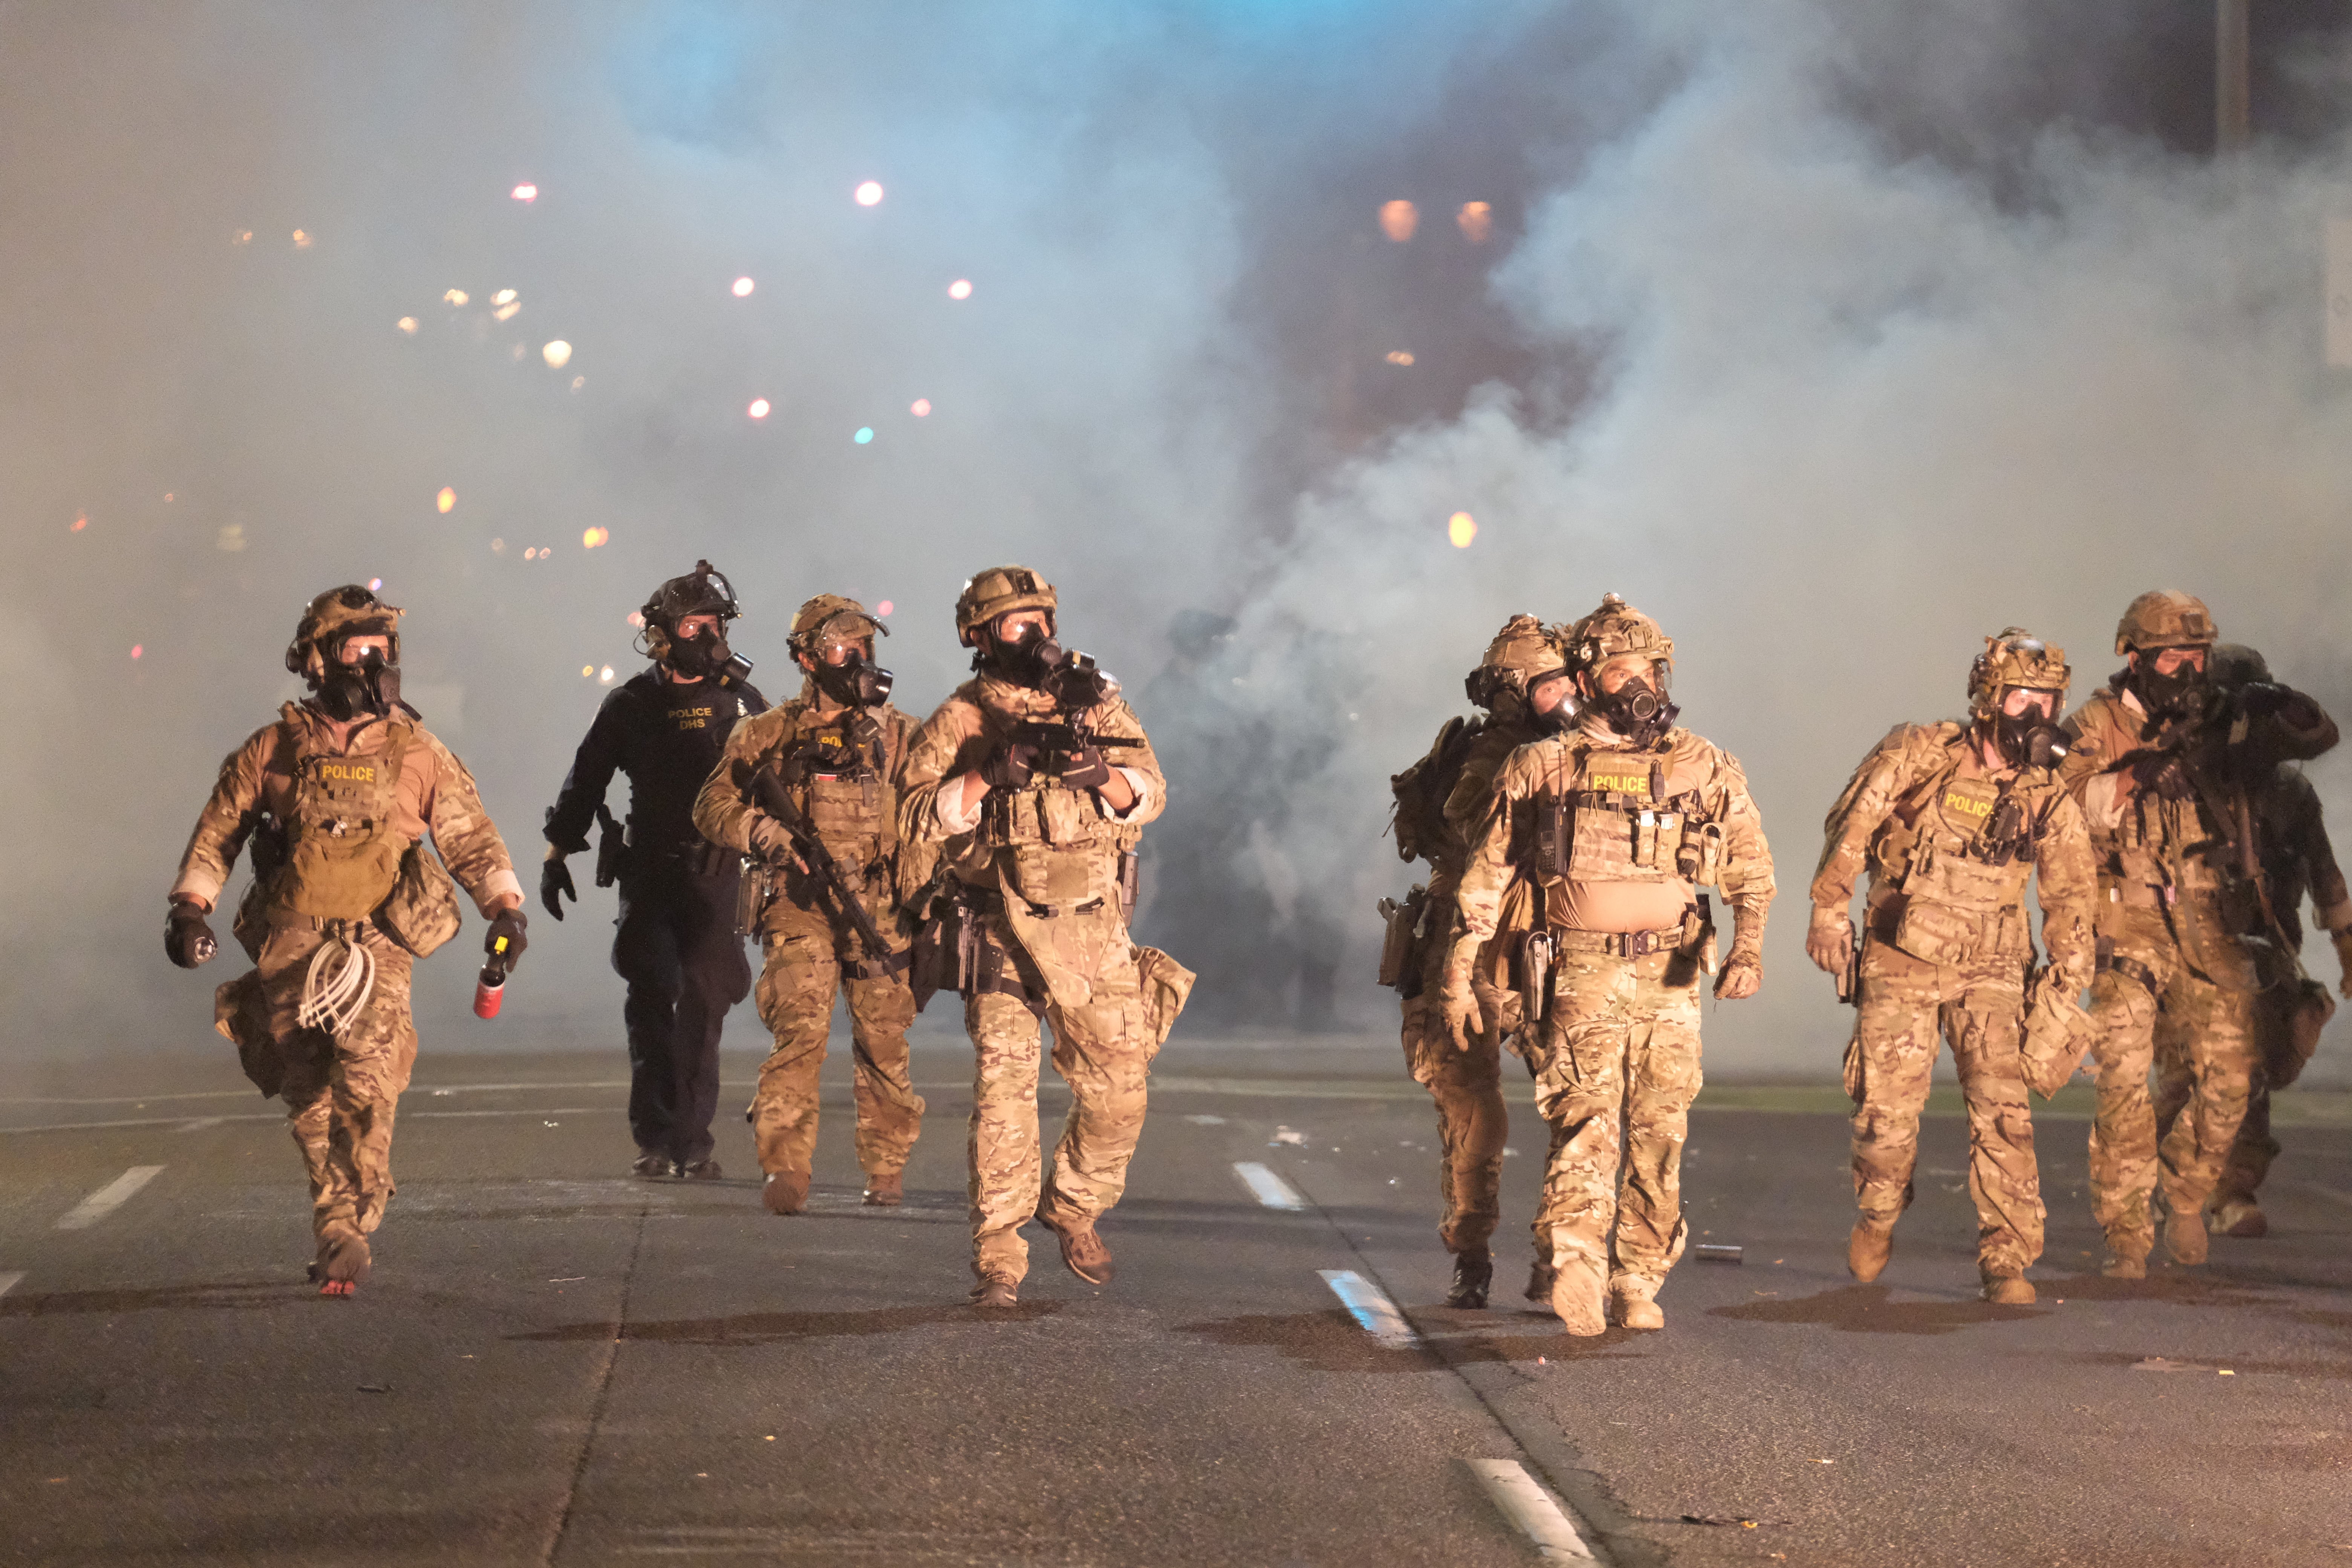 Officers in camo walk down a street at night amid smoke.